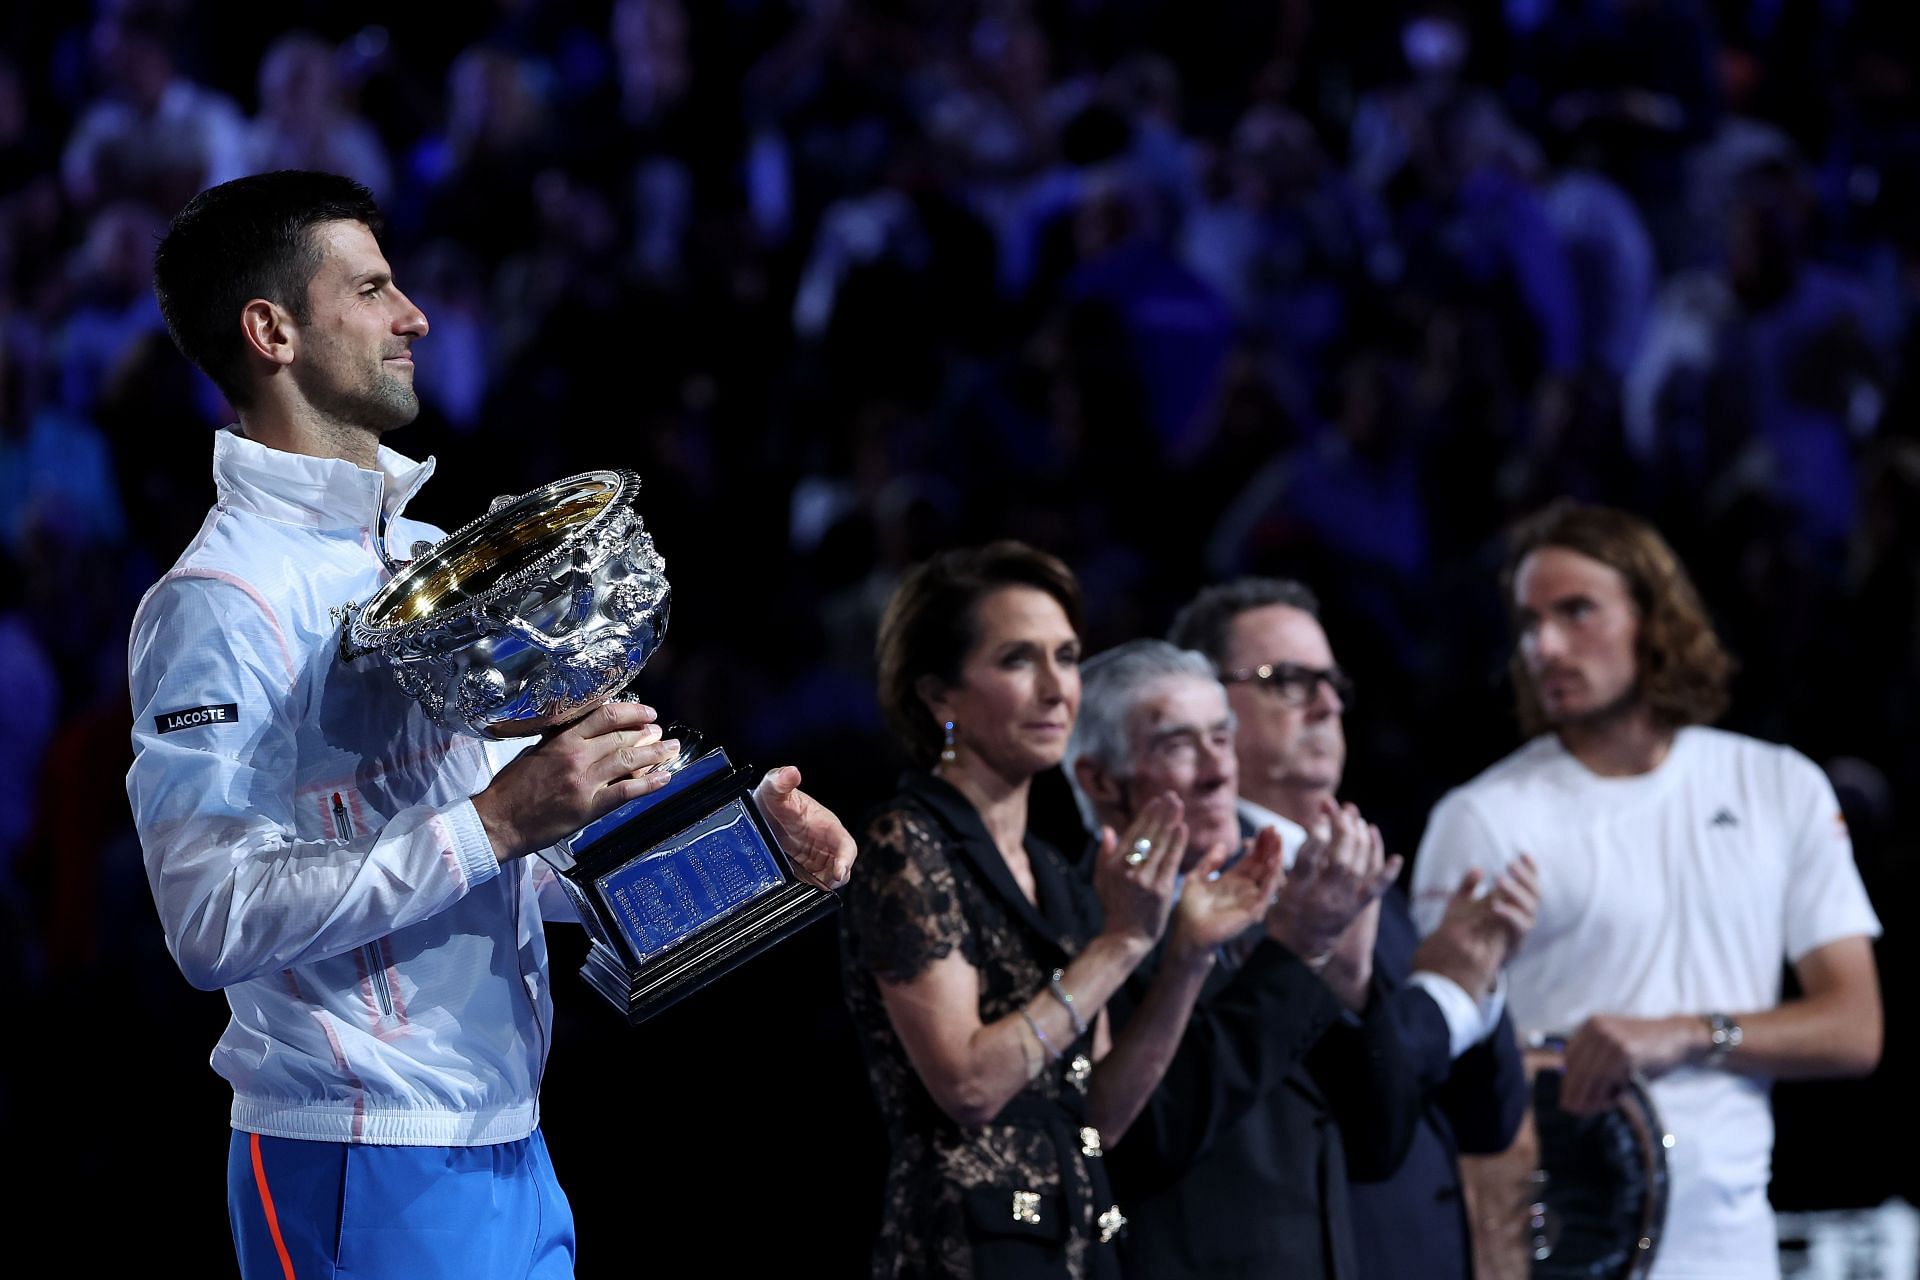 Novak Djokovic poses with the Norman Brookes Challenge Cup after winning the Final match against Stefanos Tsitsipas